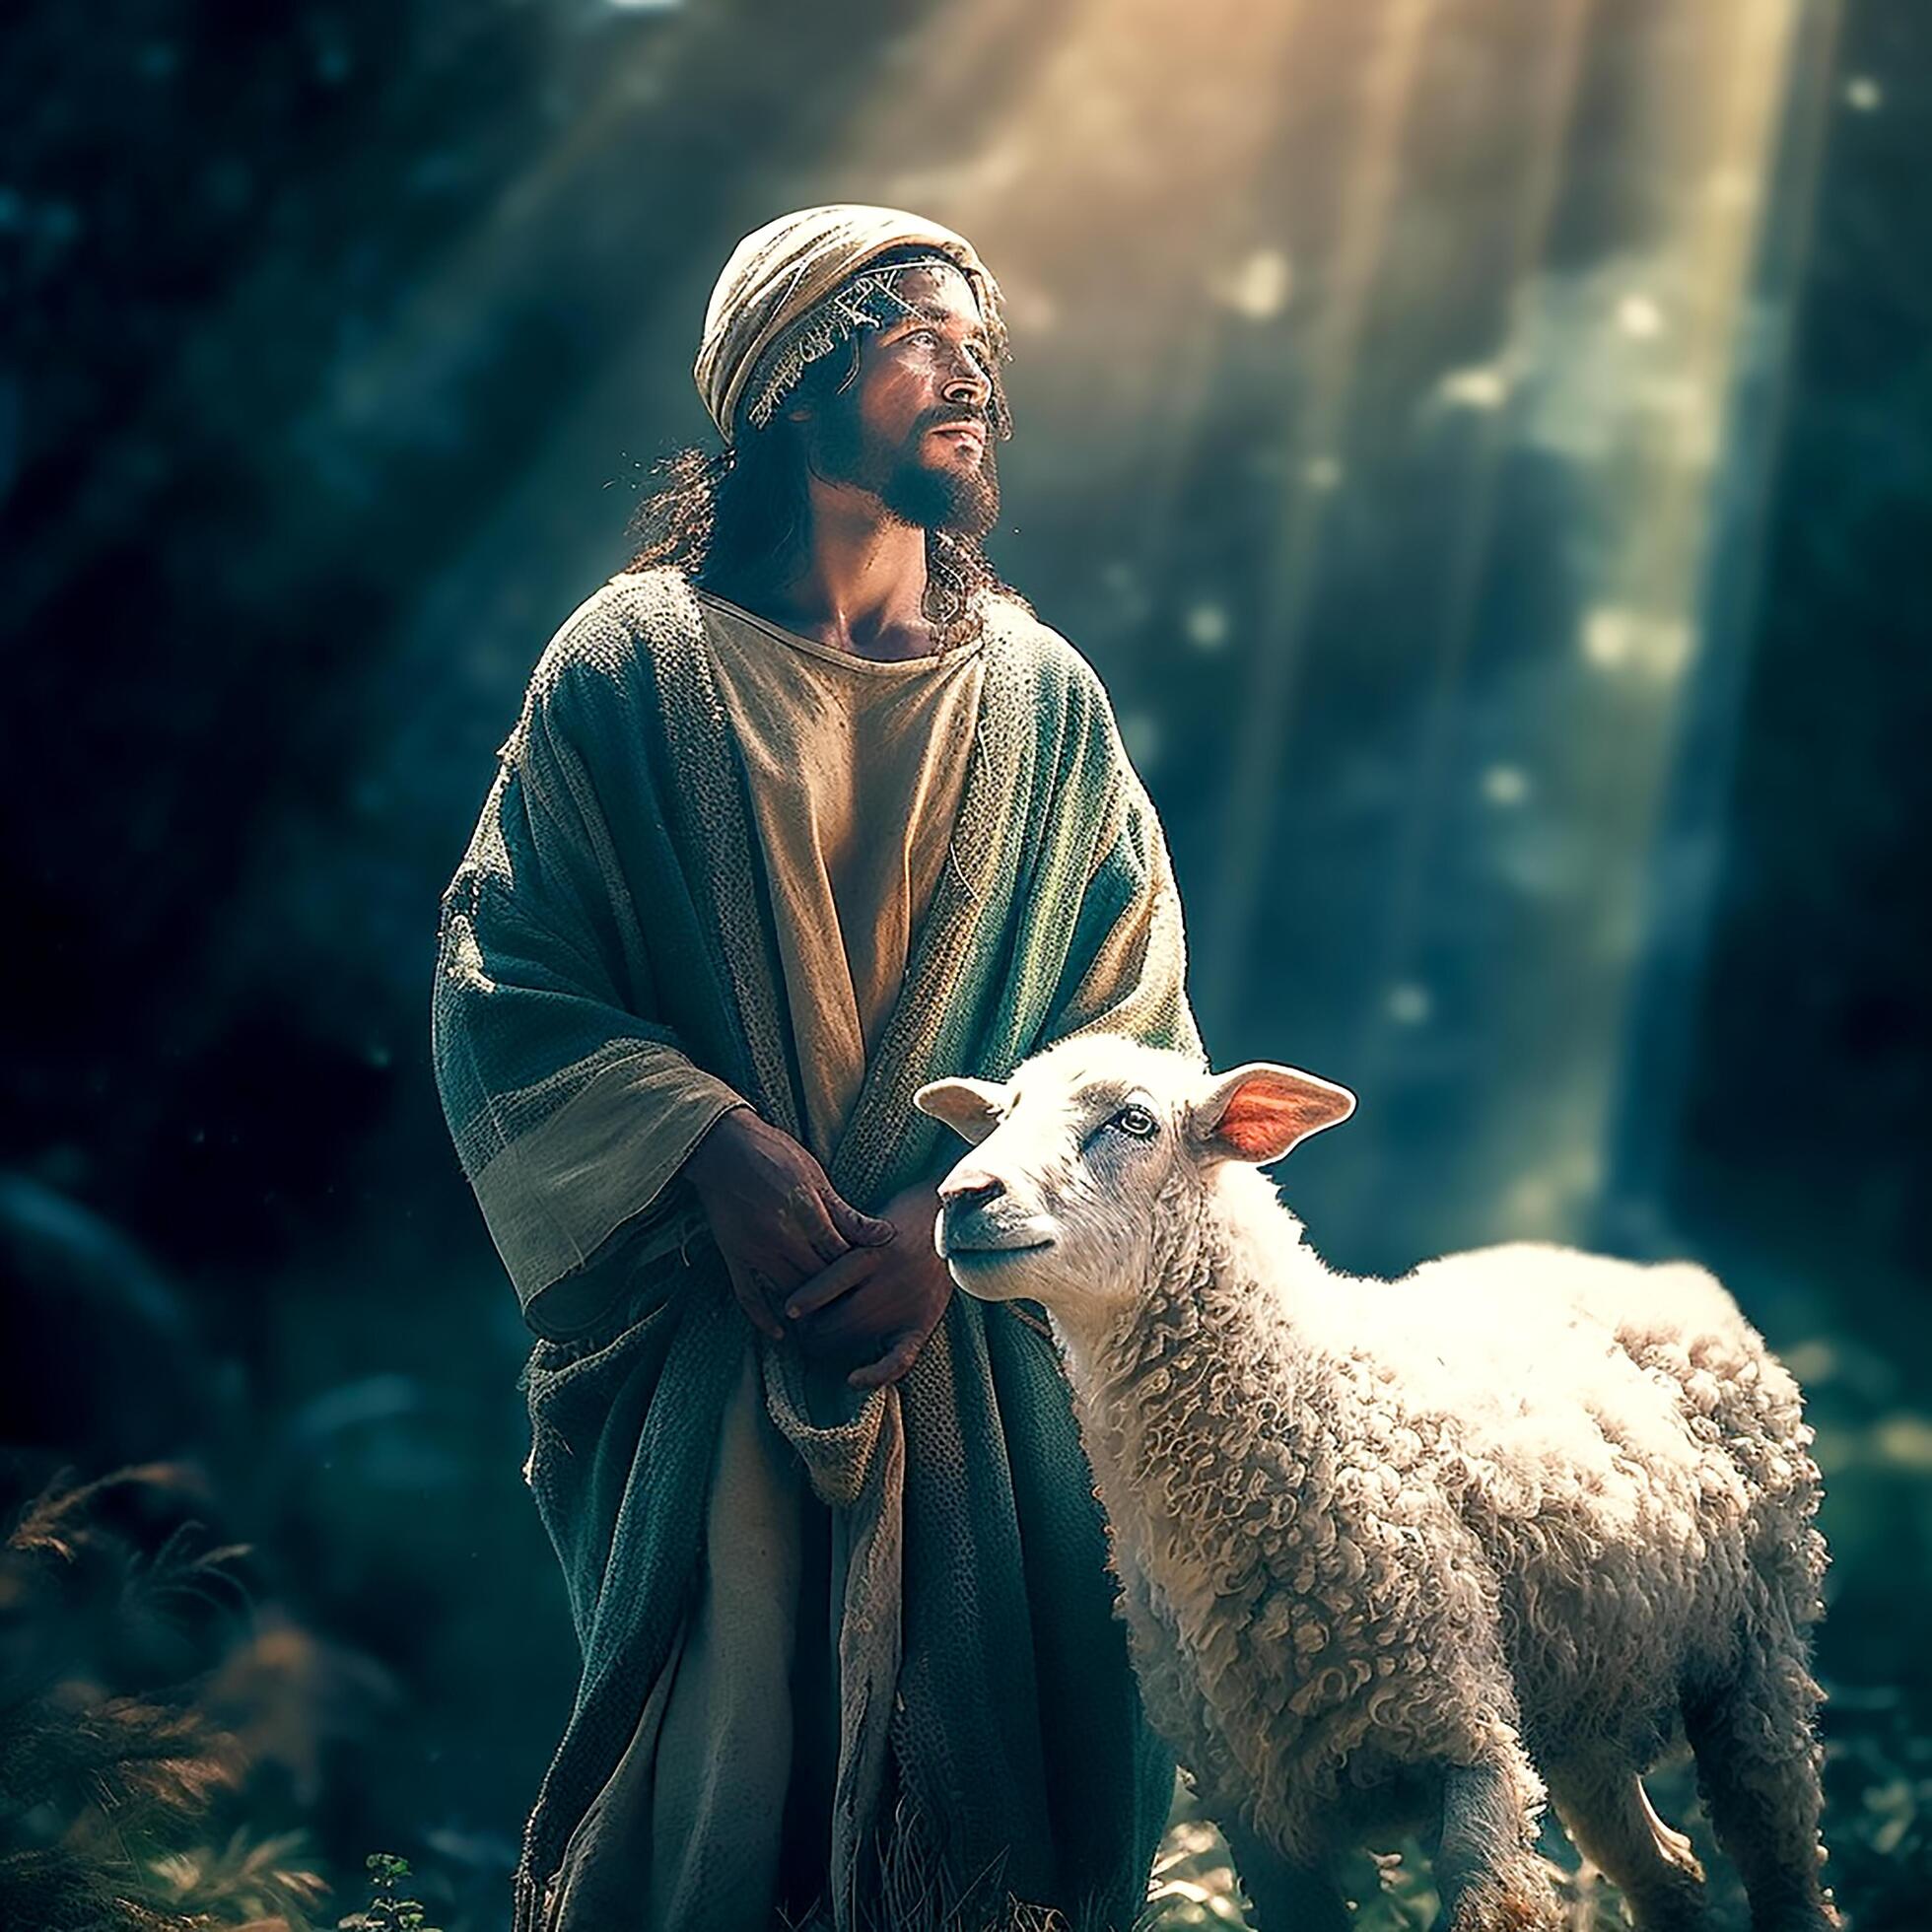 pictures of jesus as a shepherd